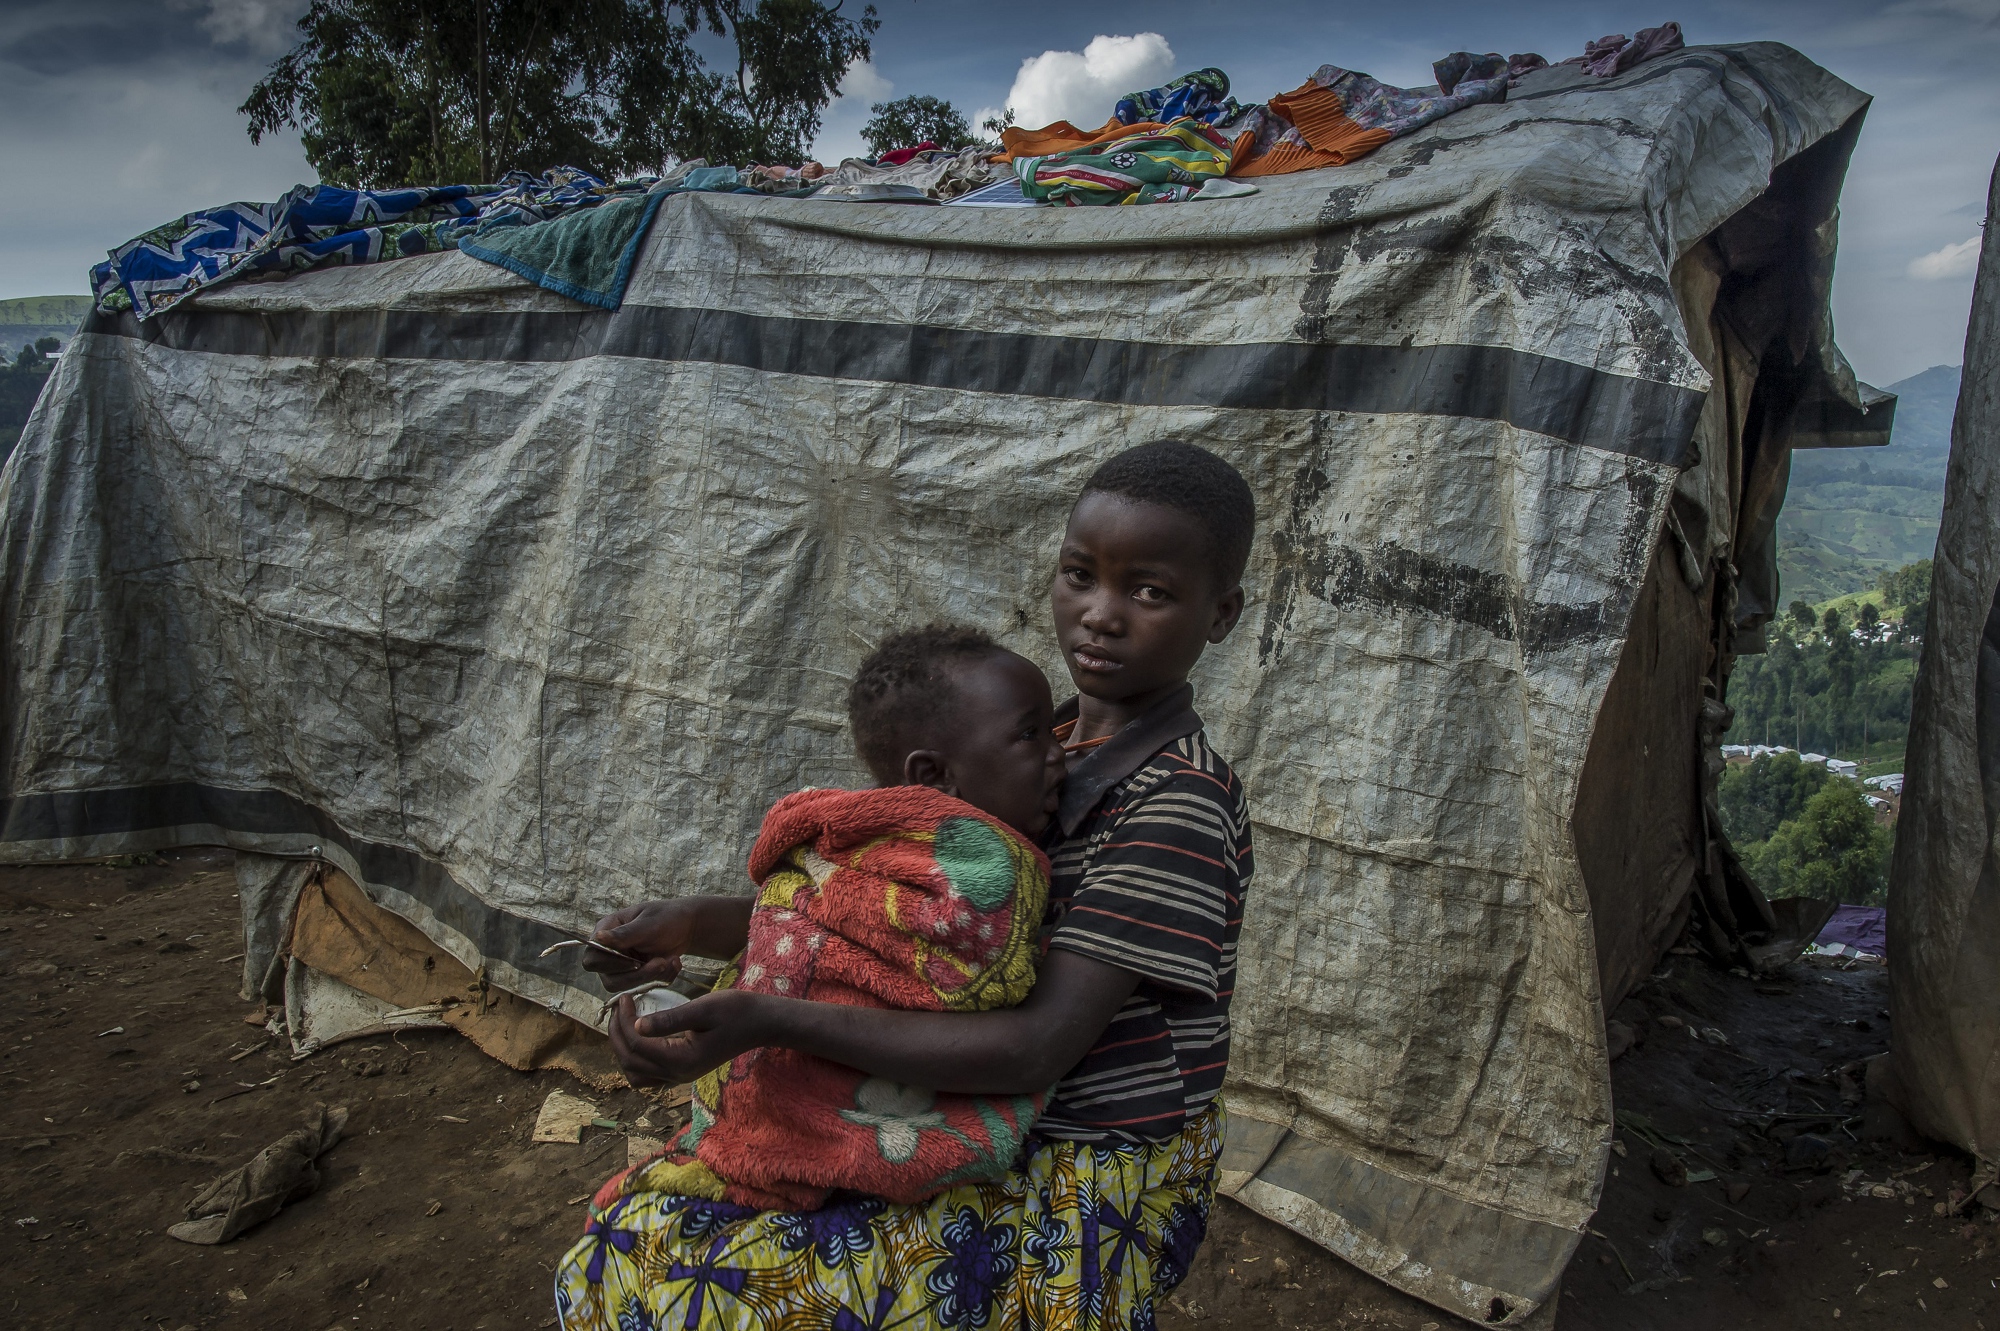 In eastern DRC, women and girls pay a high price in ongoing conflict